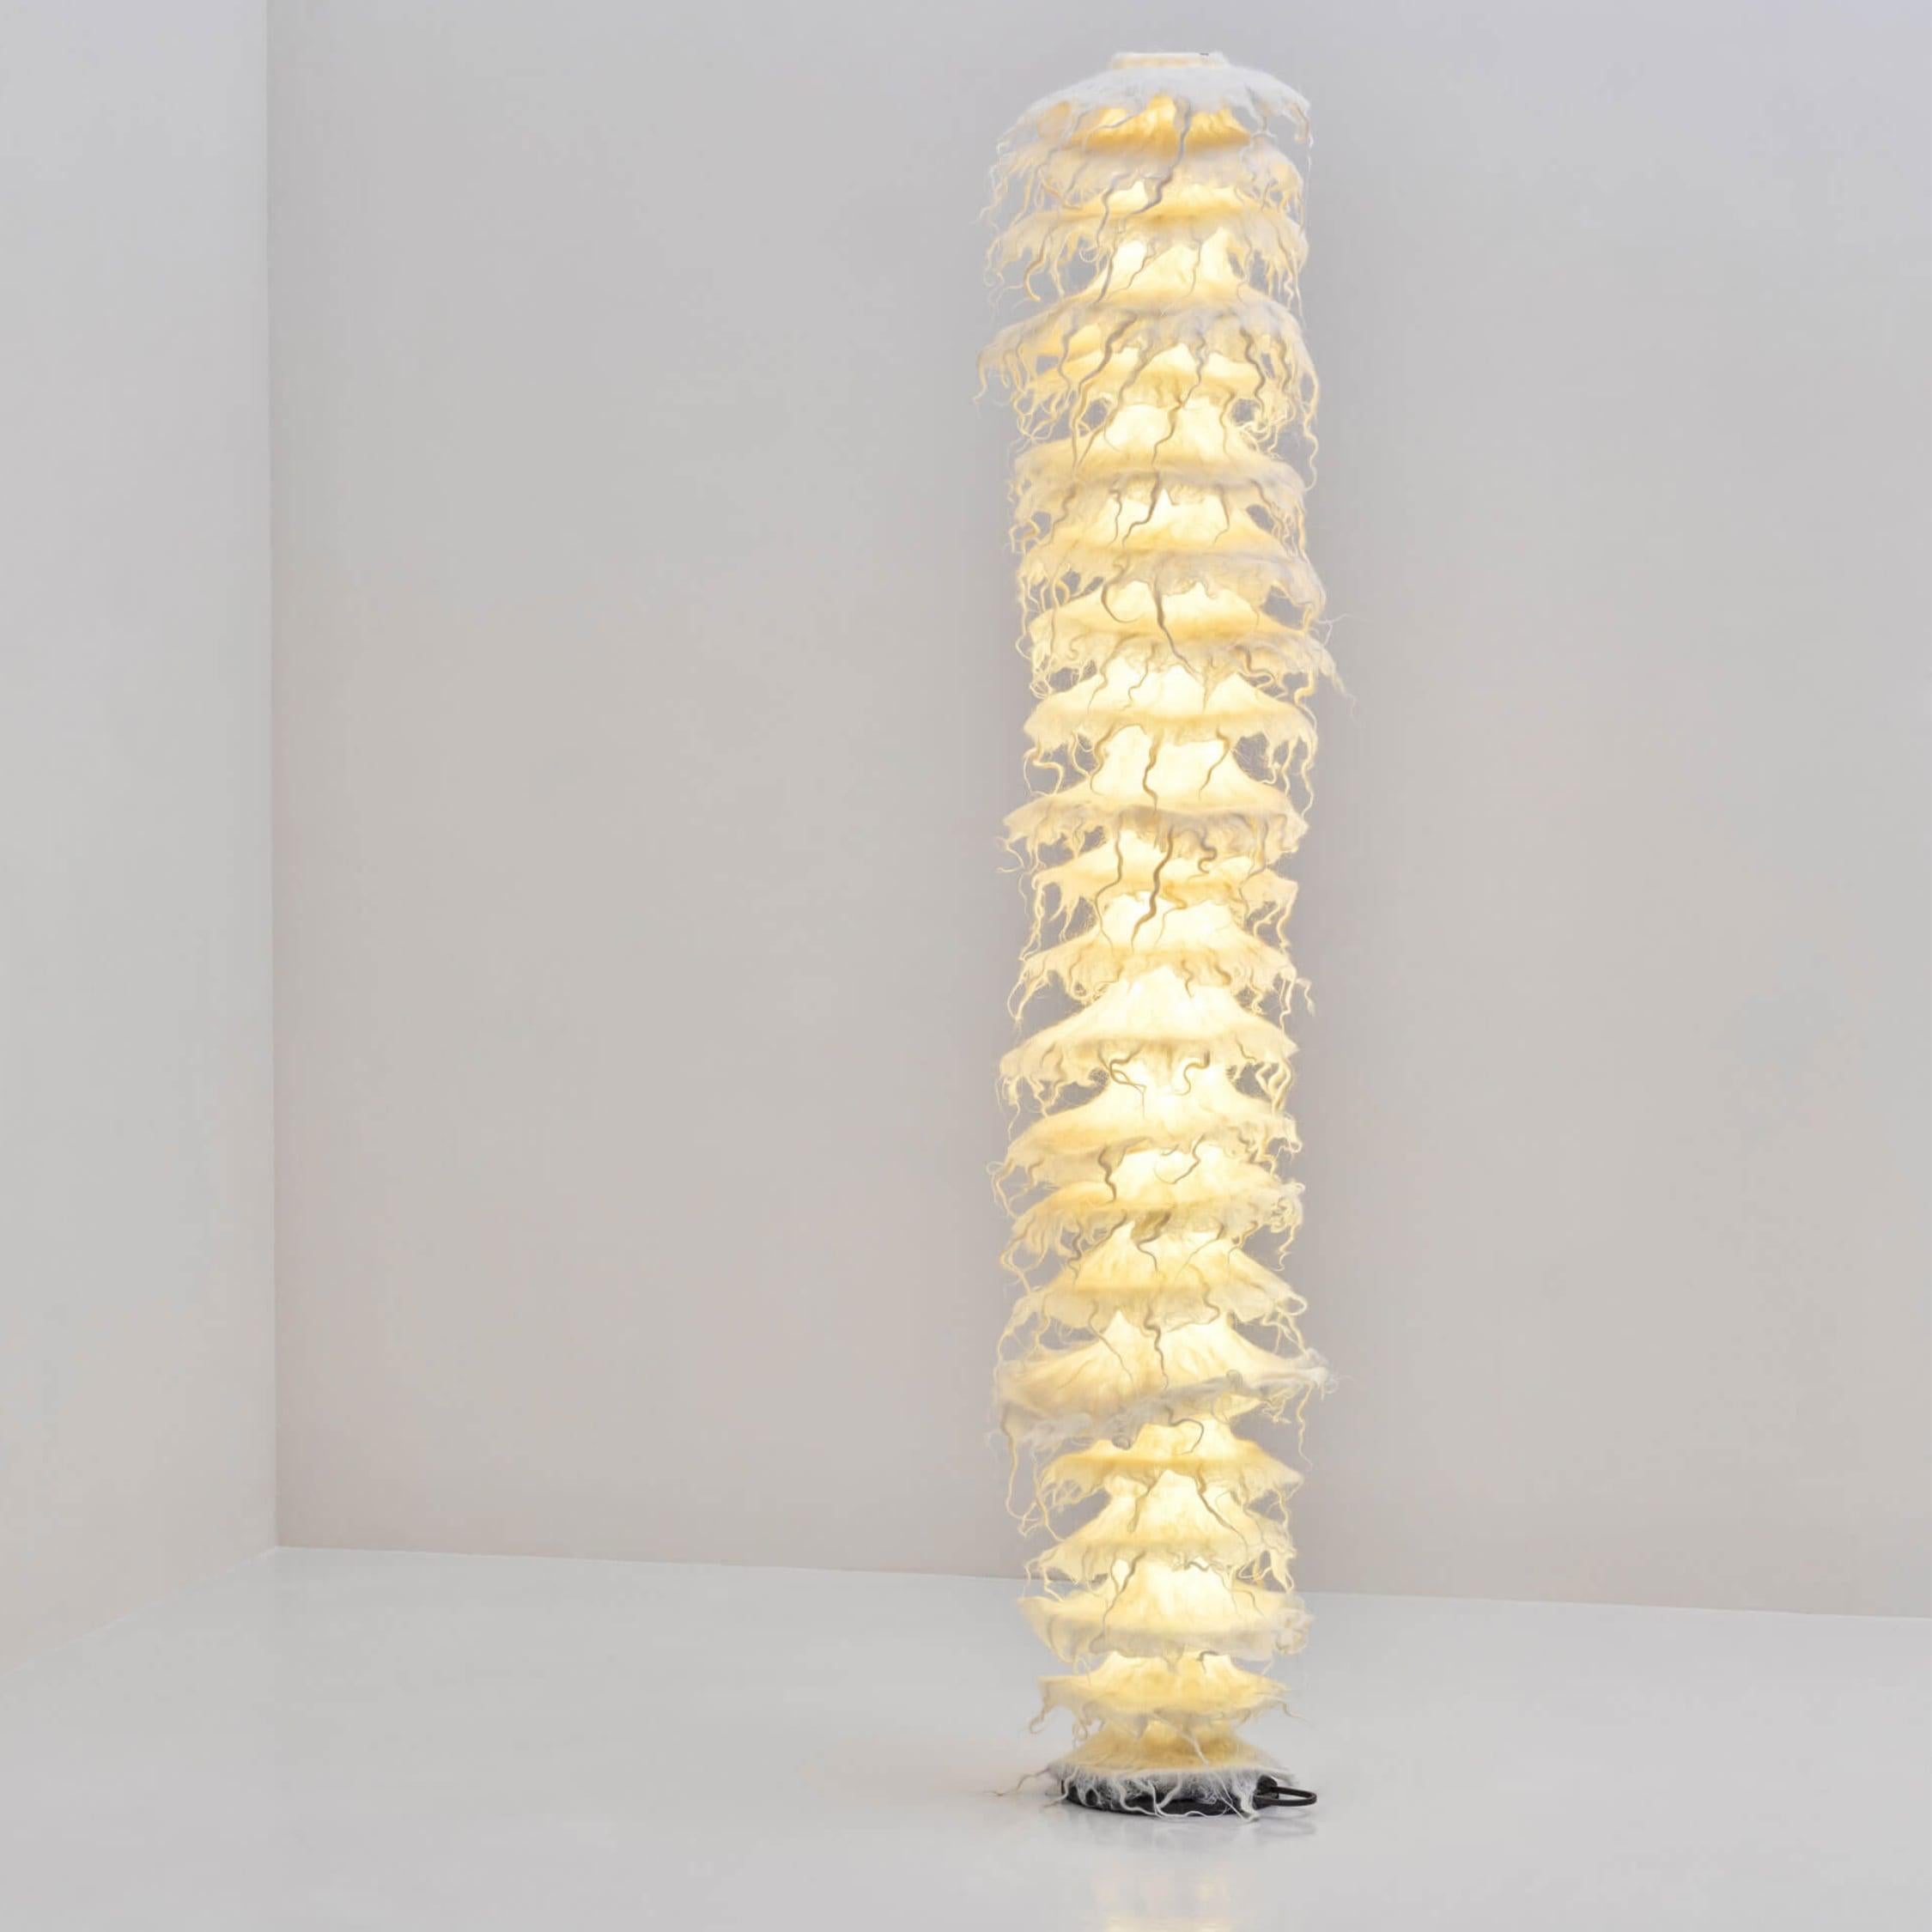 The Apaya Tinka floor lamp exemplifies Aqua Creations’ passion for textile research, and combines traditional felting techniques with modern lighting technology. The handcrafted wool sleeve is slipped over a transparent cylinder that evokes the